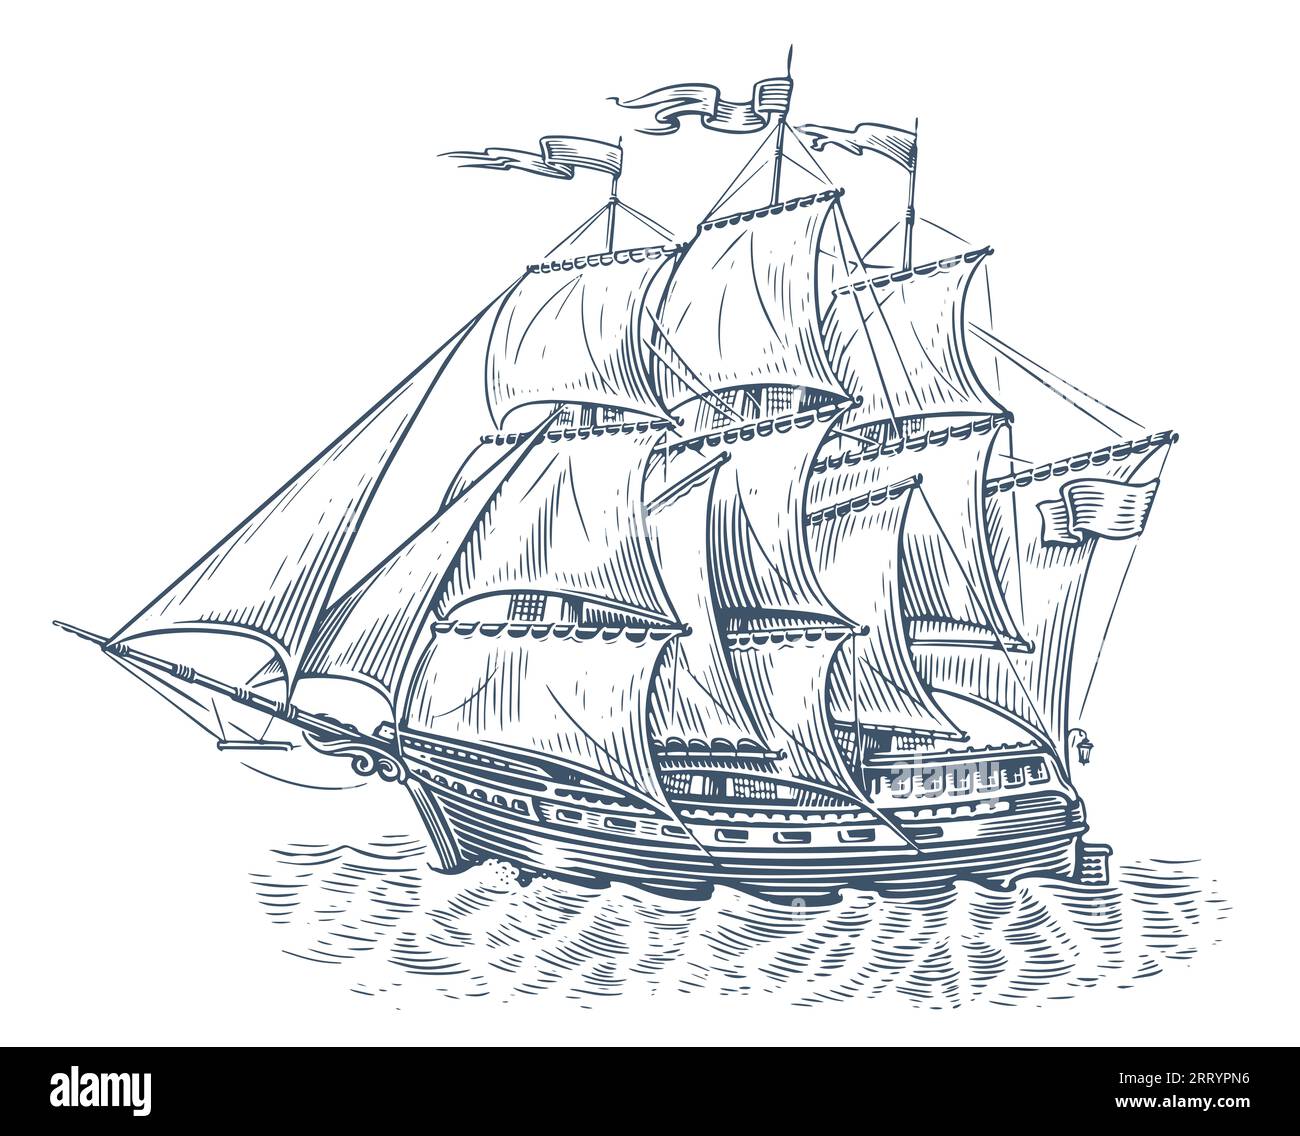 Sailboat sails on the sea waves in vintage engraving style. Sailing ship sketch illustration Stock Photo